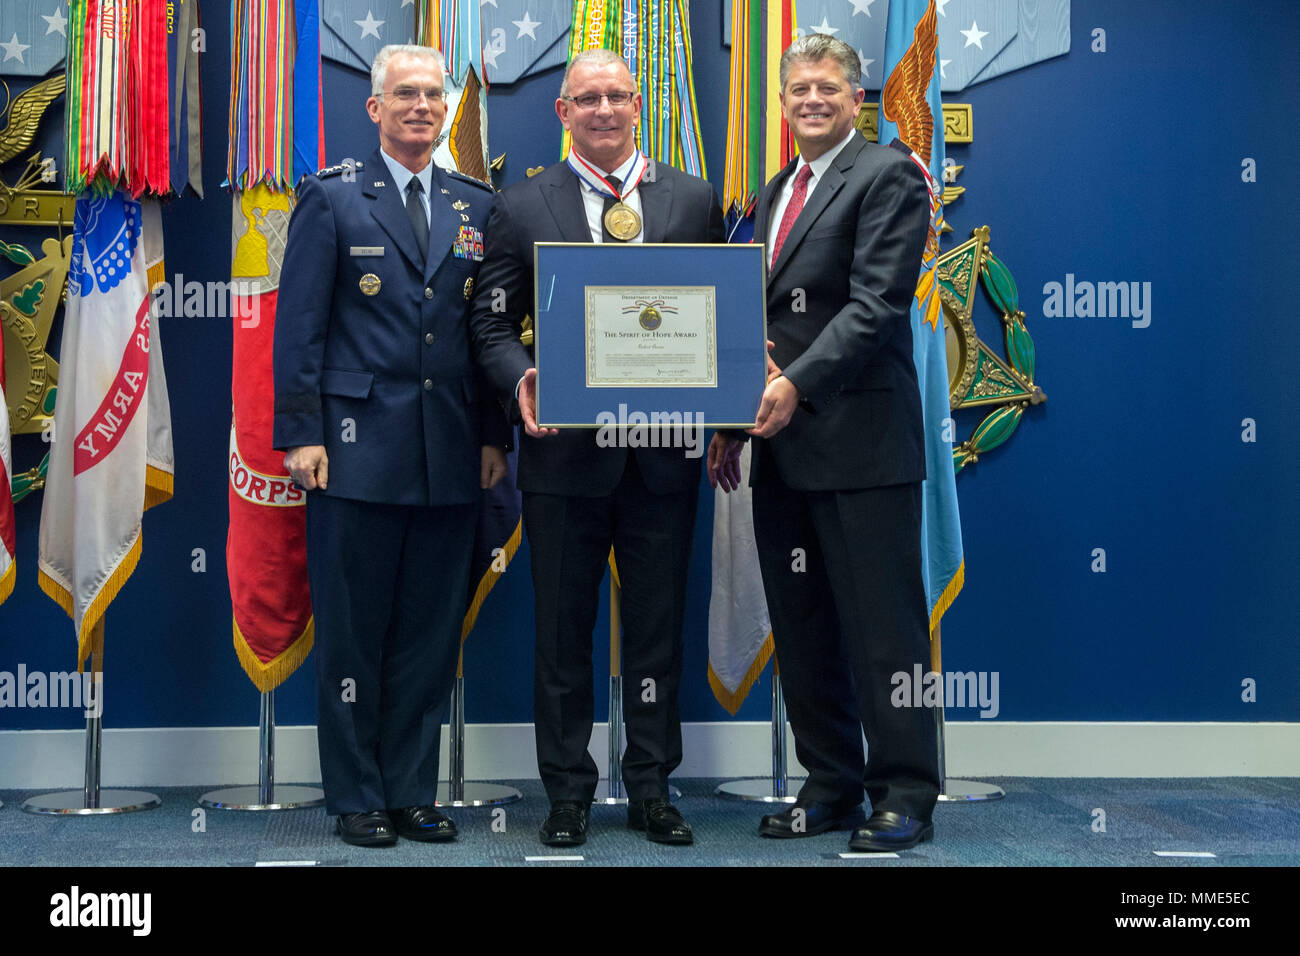 Robert Irvine, second from left, accepts The Spirit of Hope Award at the Pentagon in Arlington, Va. Oct. 26, 2017. The award is named after Bob Hope, the first honorary military veteran, and is presented to people whose patriotism and service reflect Hope’s. Stock Photo